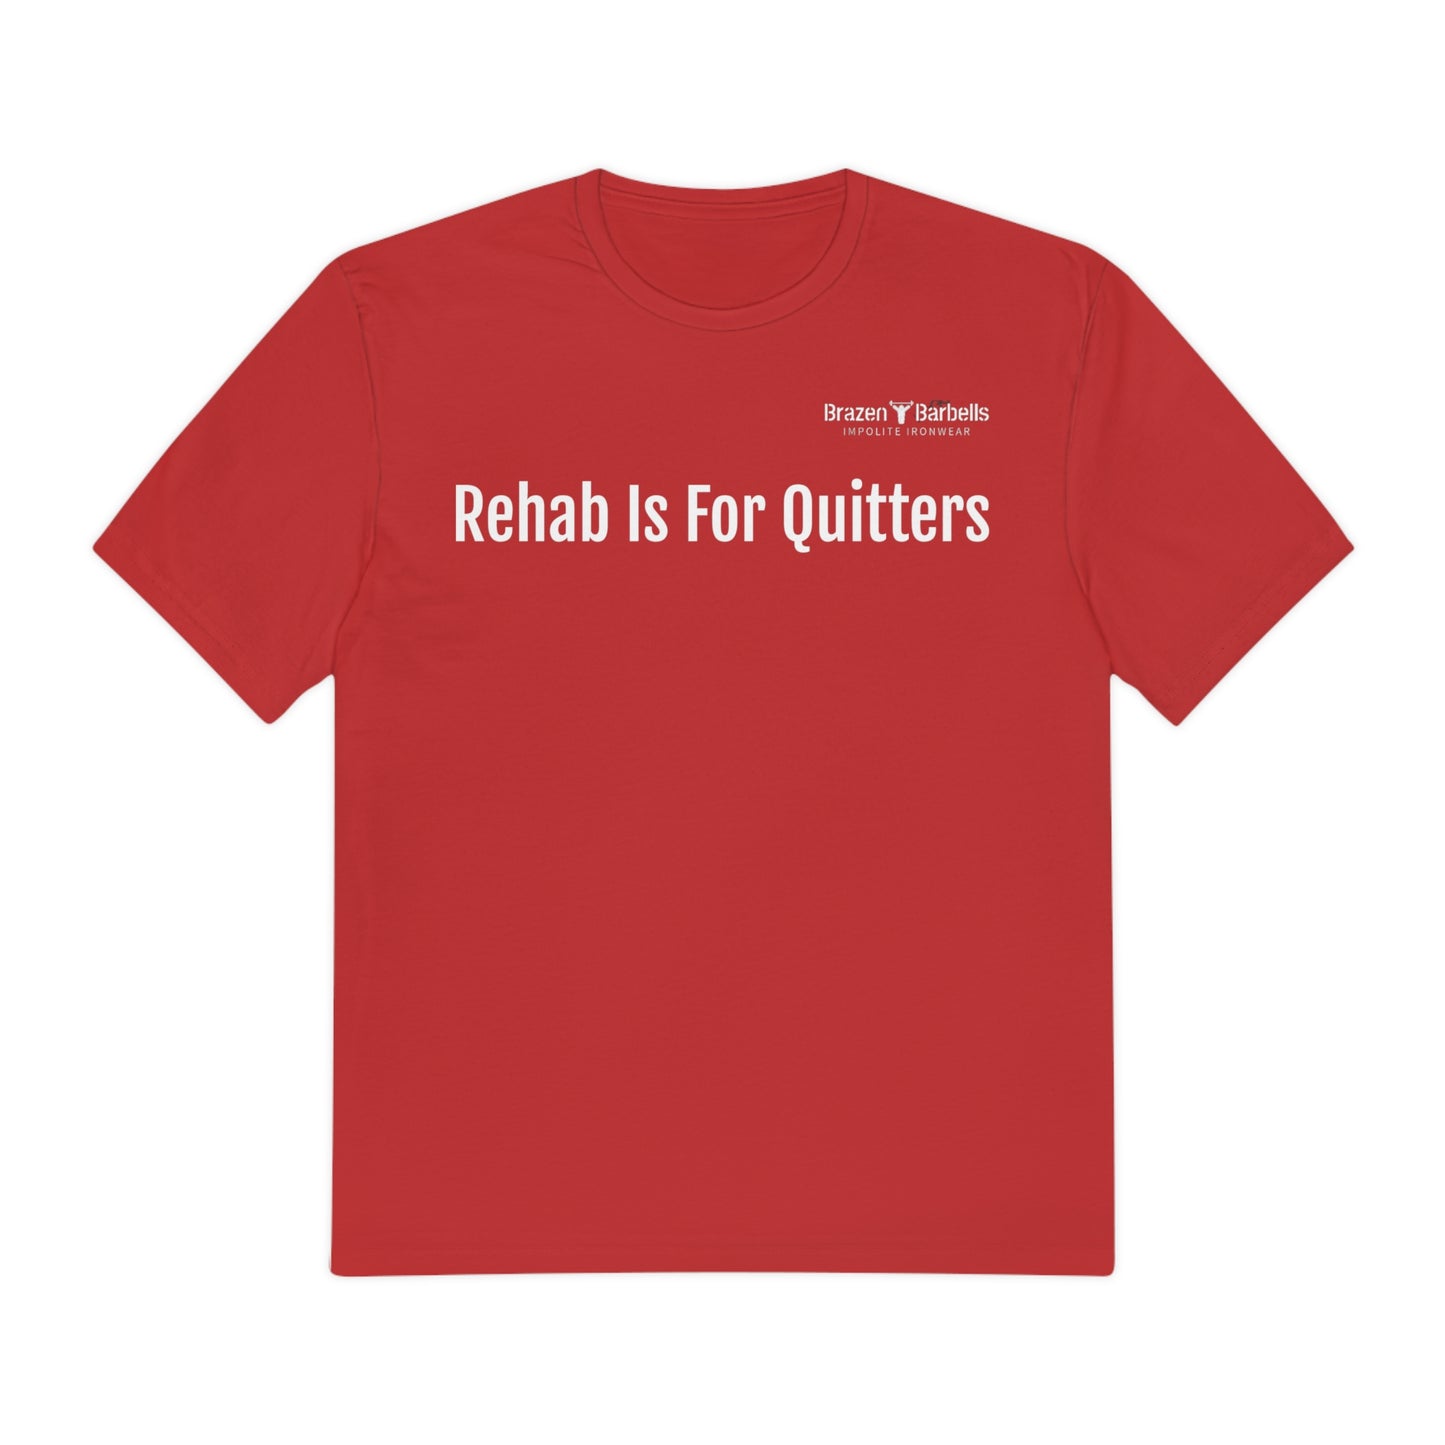 Rehab is for Quitters Tee